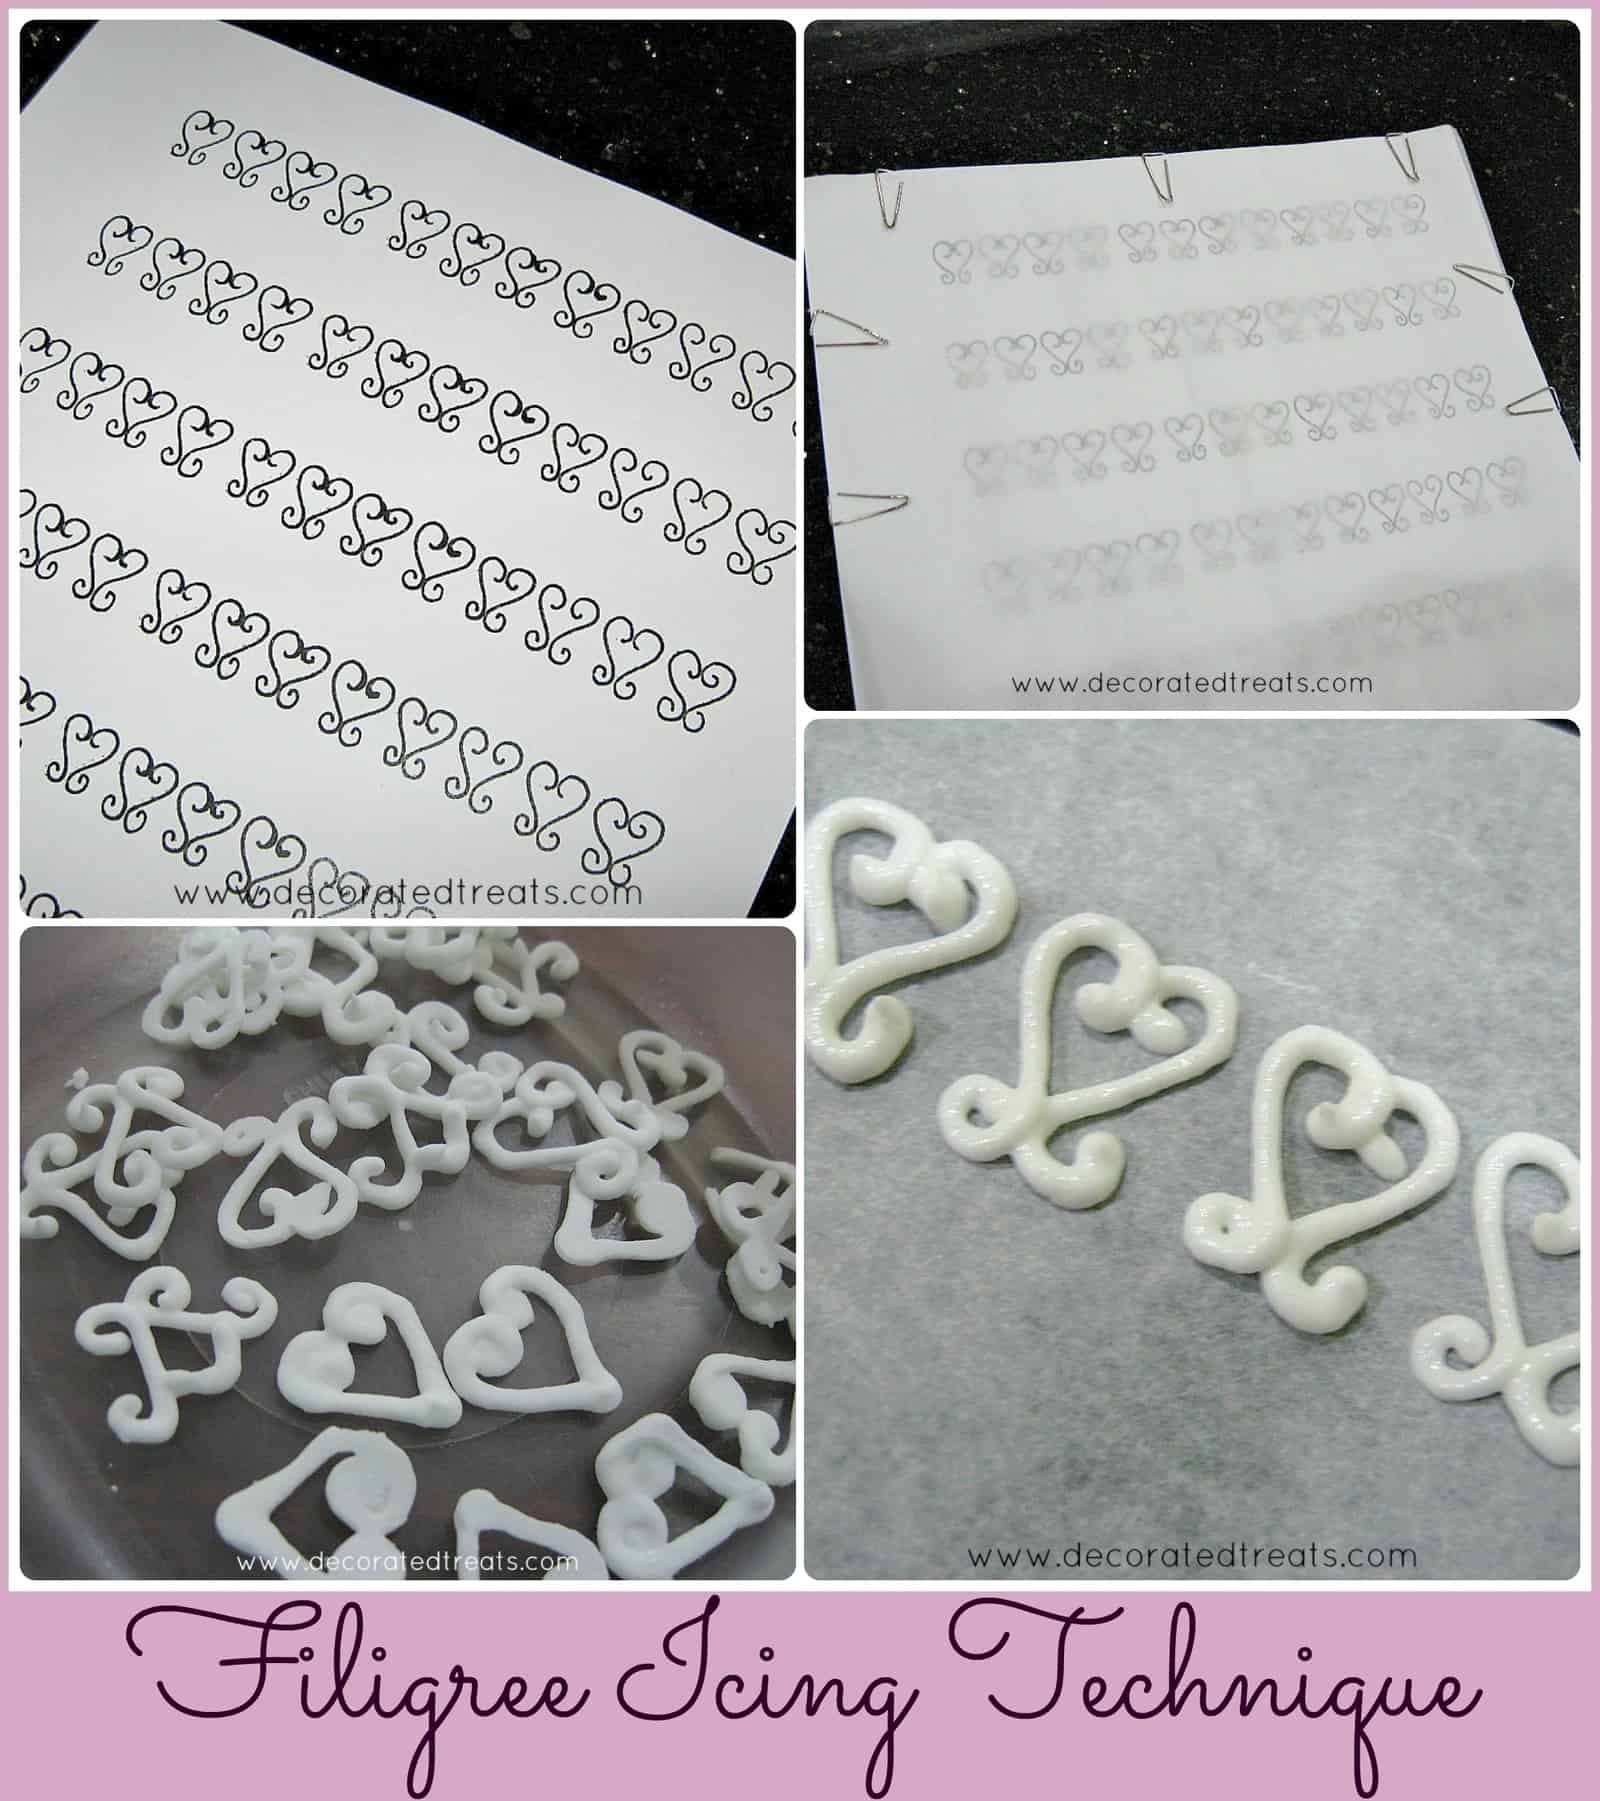 Poster for filigree icing technique